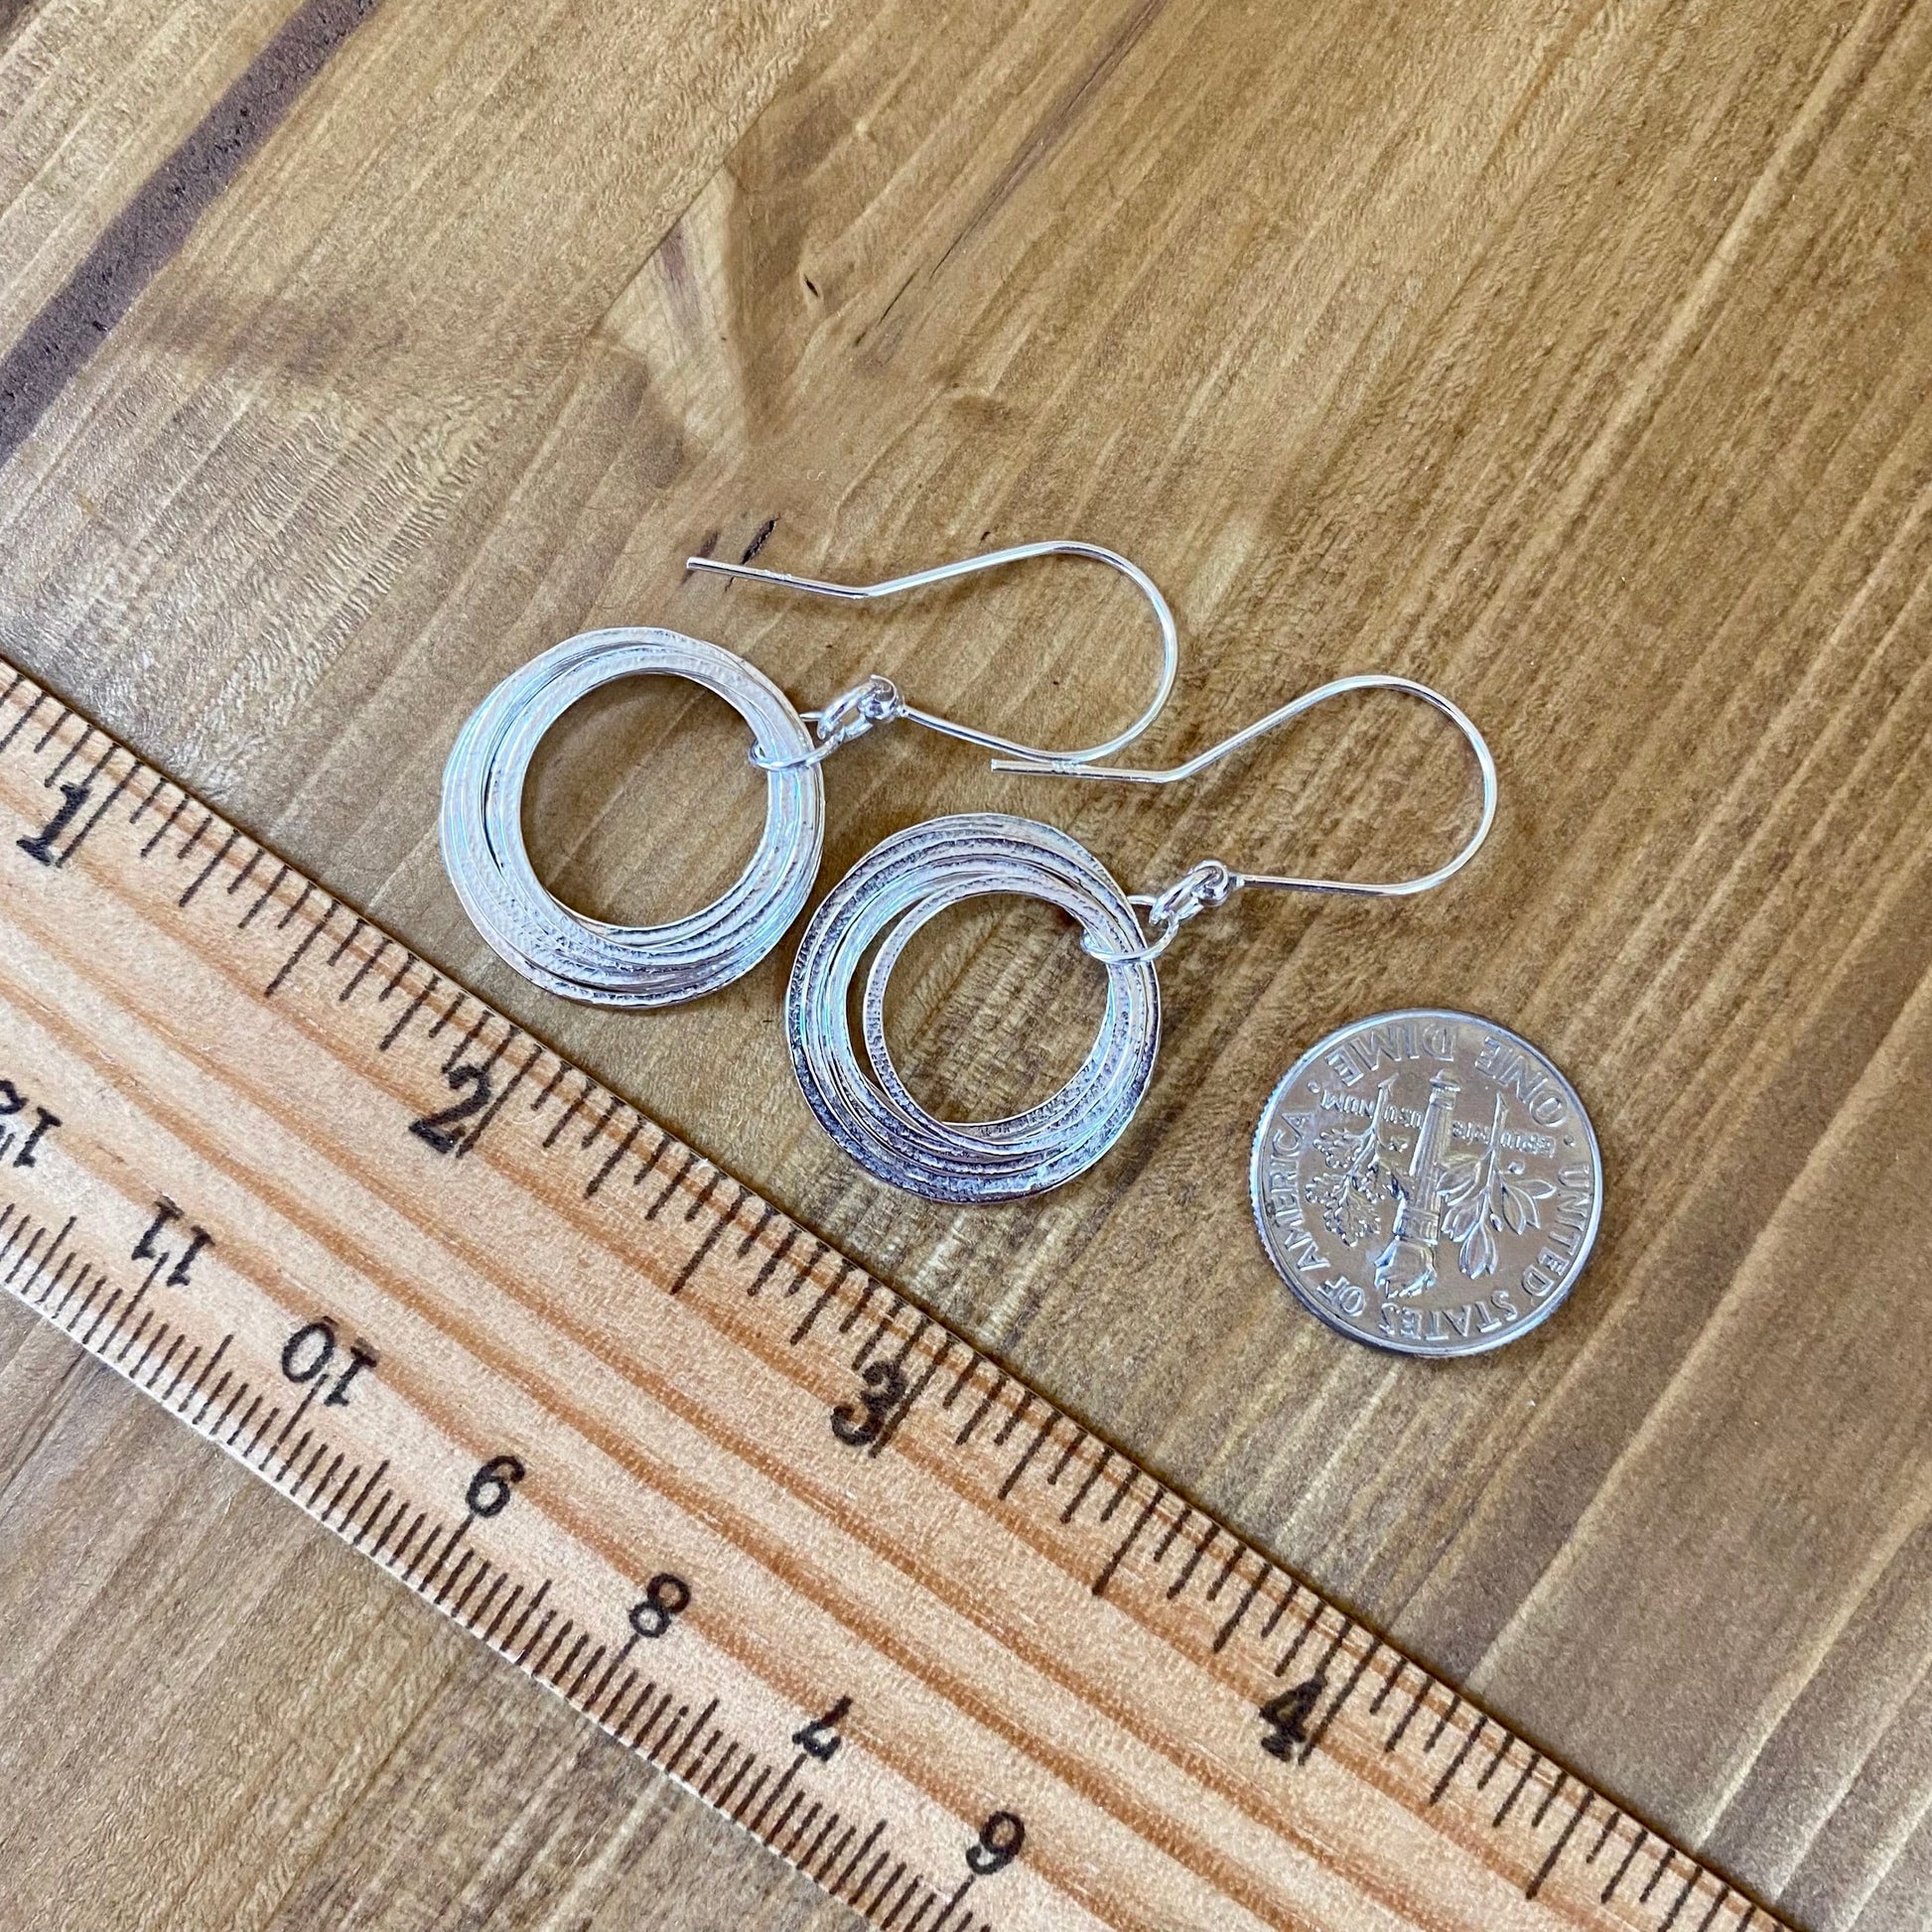 70th Birthday Earrings, Sterling Silver 7 Circles Small Hoops, Sparkly Textured Flat 7 Rings for 7 Decades, Elegant Birthday Gift for Her